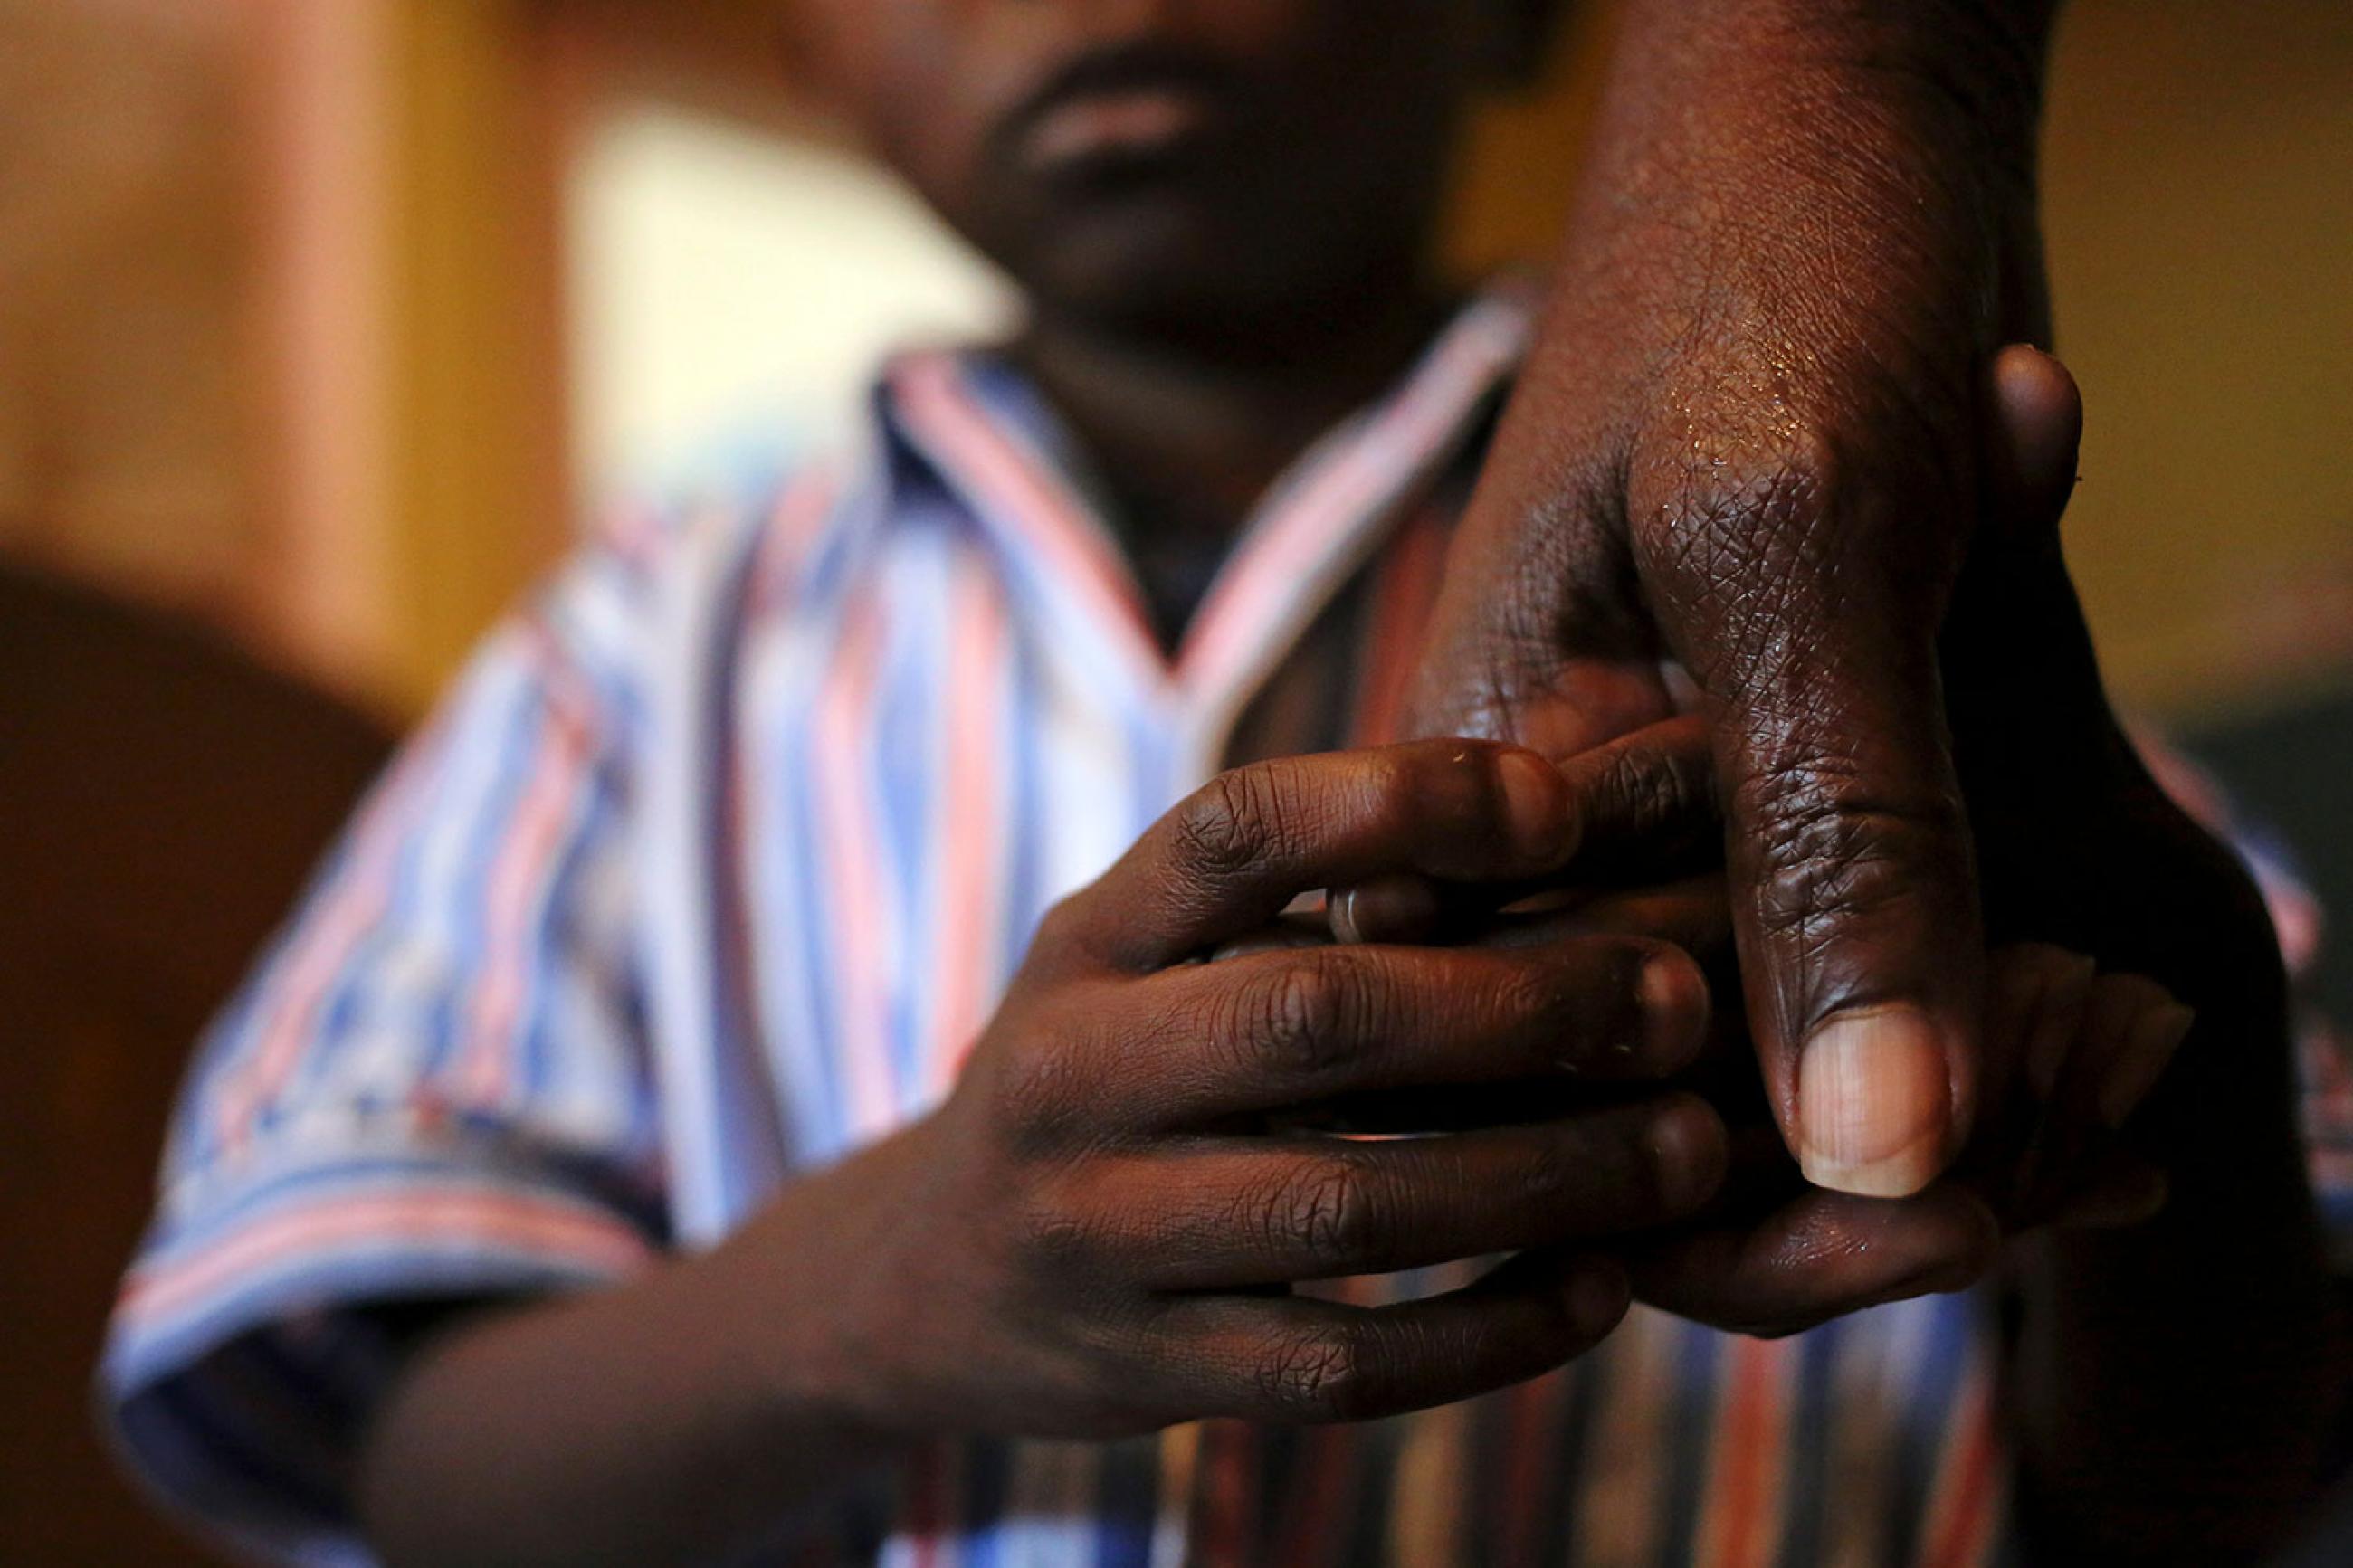 Nine-year-old Tumelo holds his grandmother's hand after taking his medication at Nkosi's Haven, south of Johannesburg, on November 28, 2014. Picture shows a large adult hand and the lower part of a child’s face in the background as his own hand grasps his grandmother’s. 